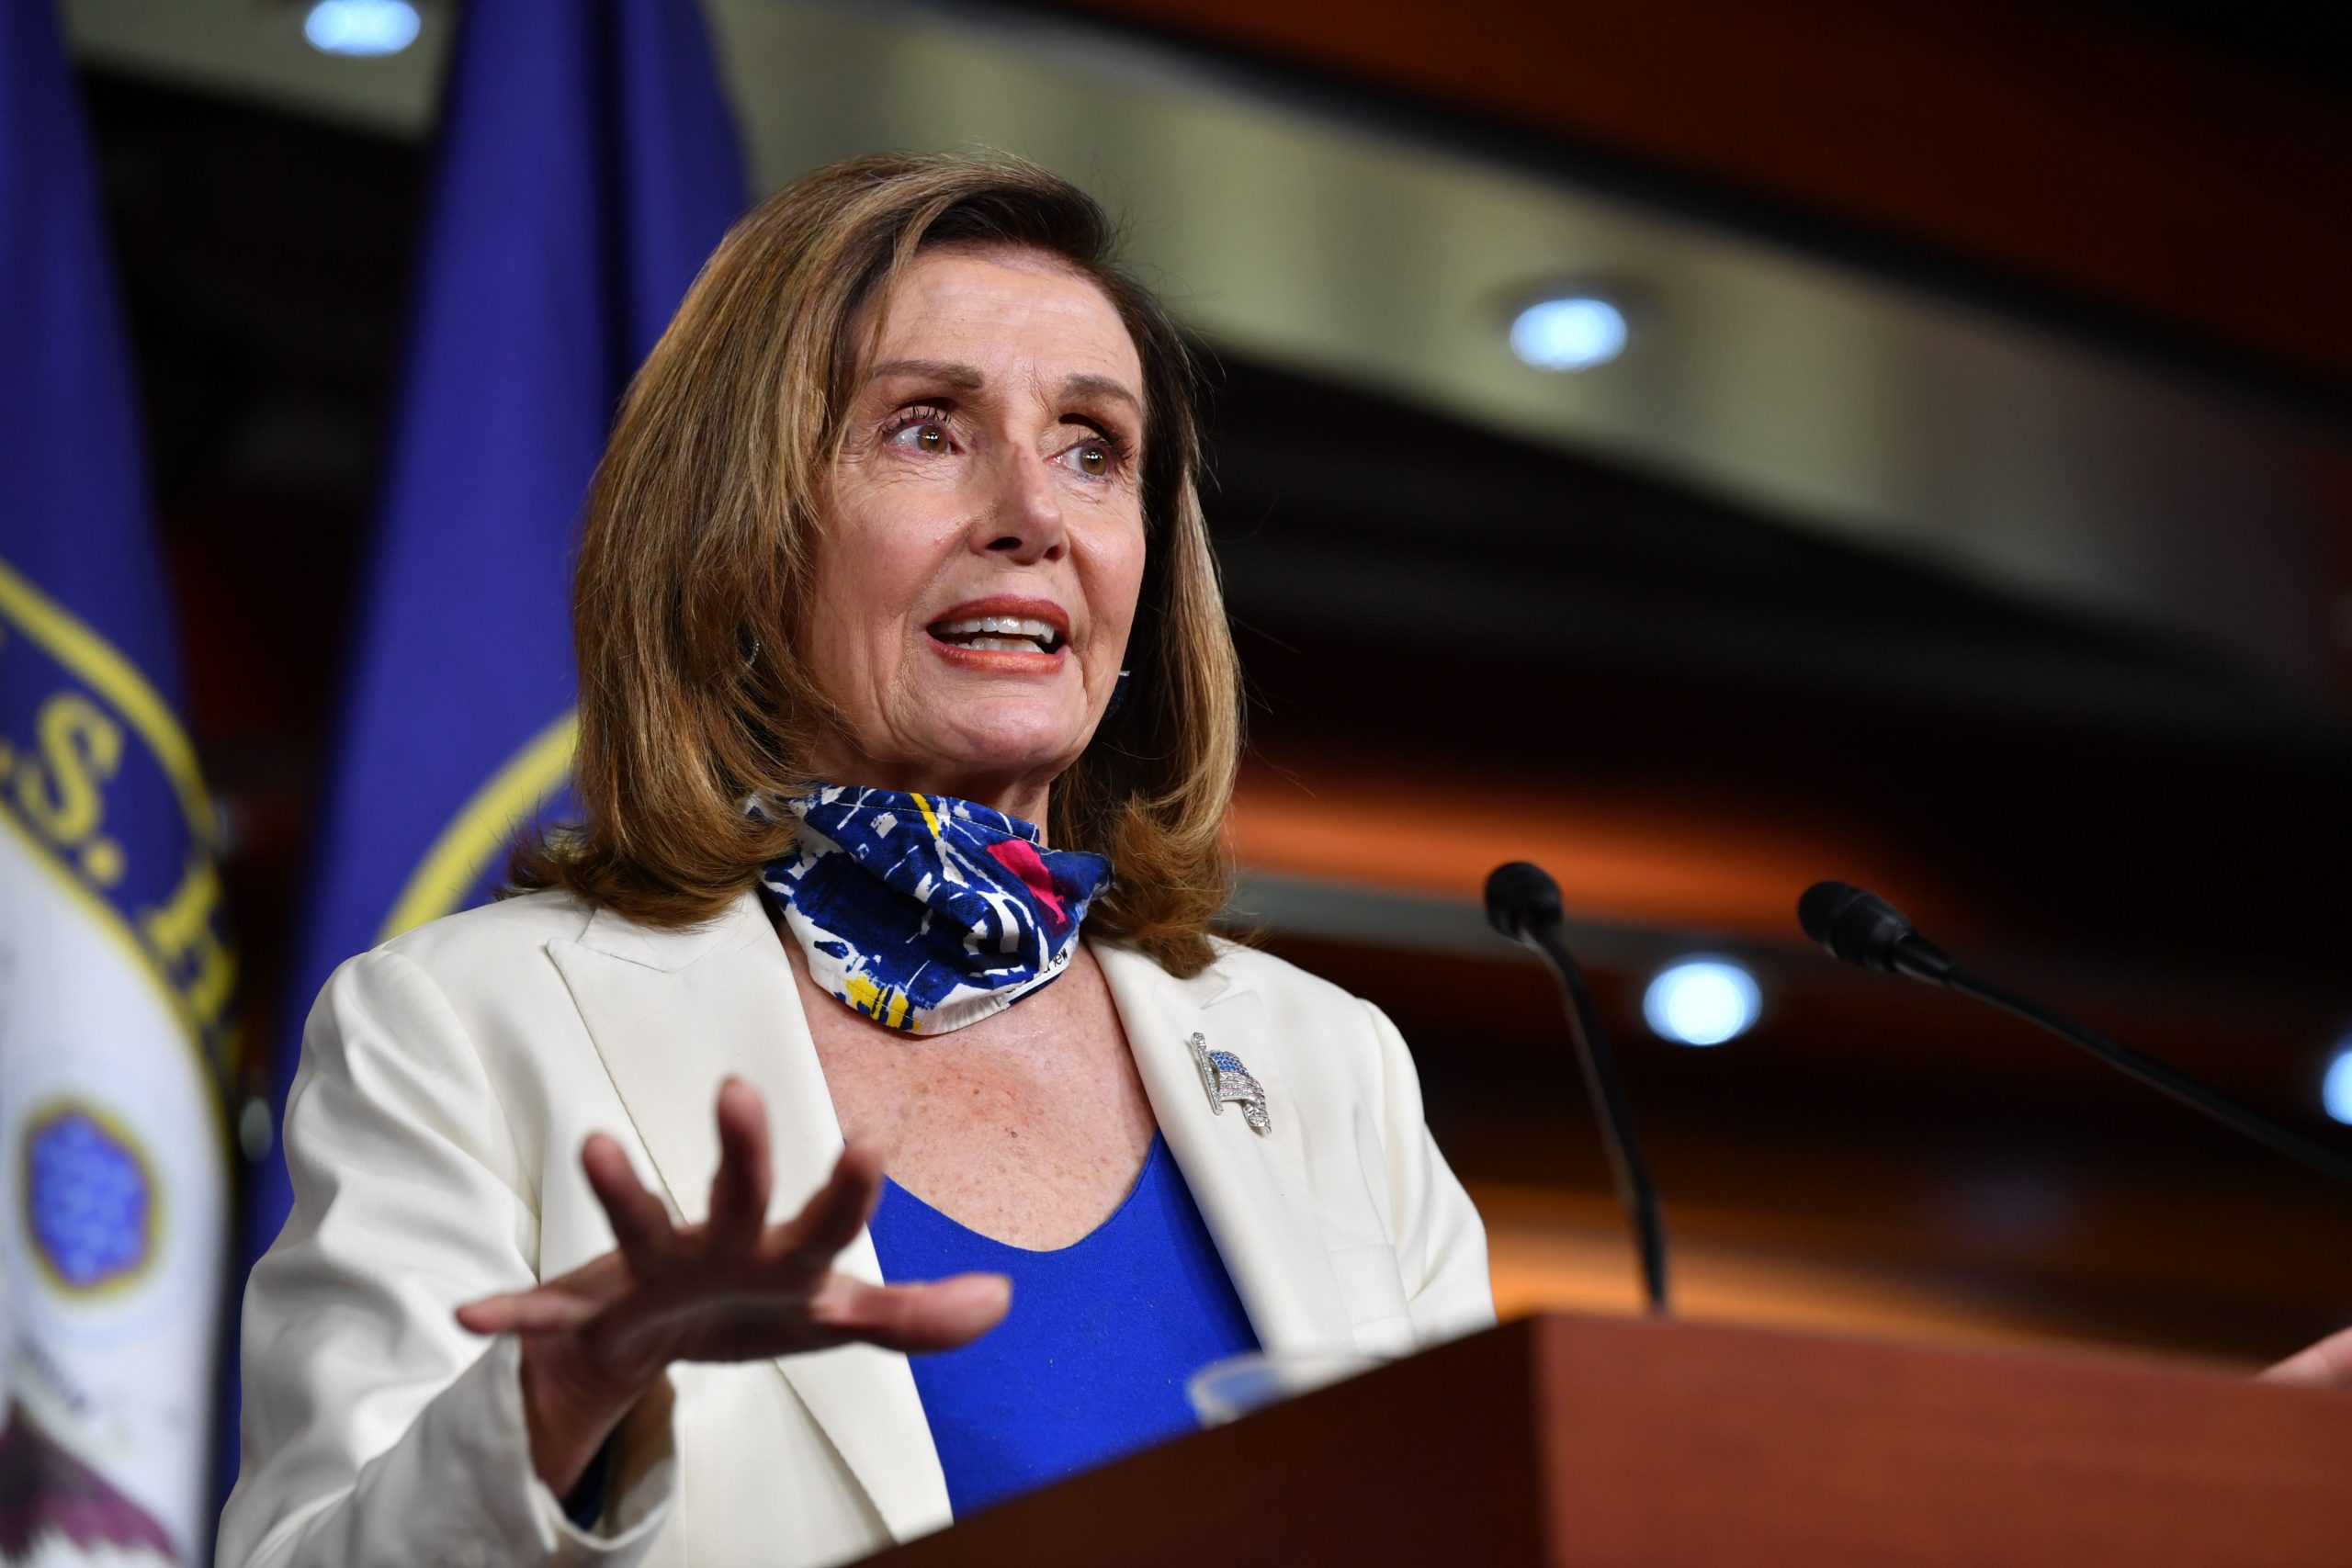 Do not make the House a petri dish: Nancy Pelosi to unvaccinated US lawmakers